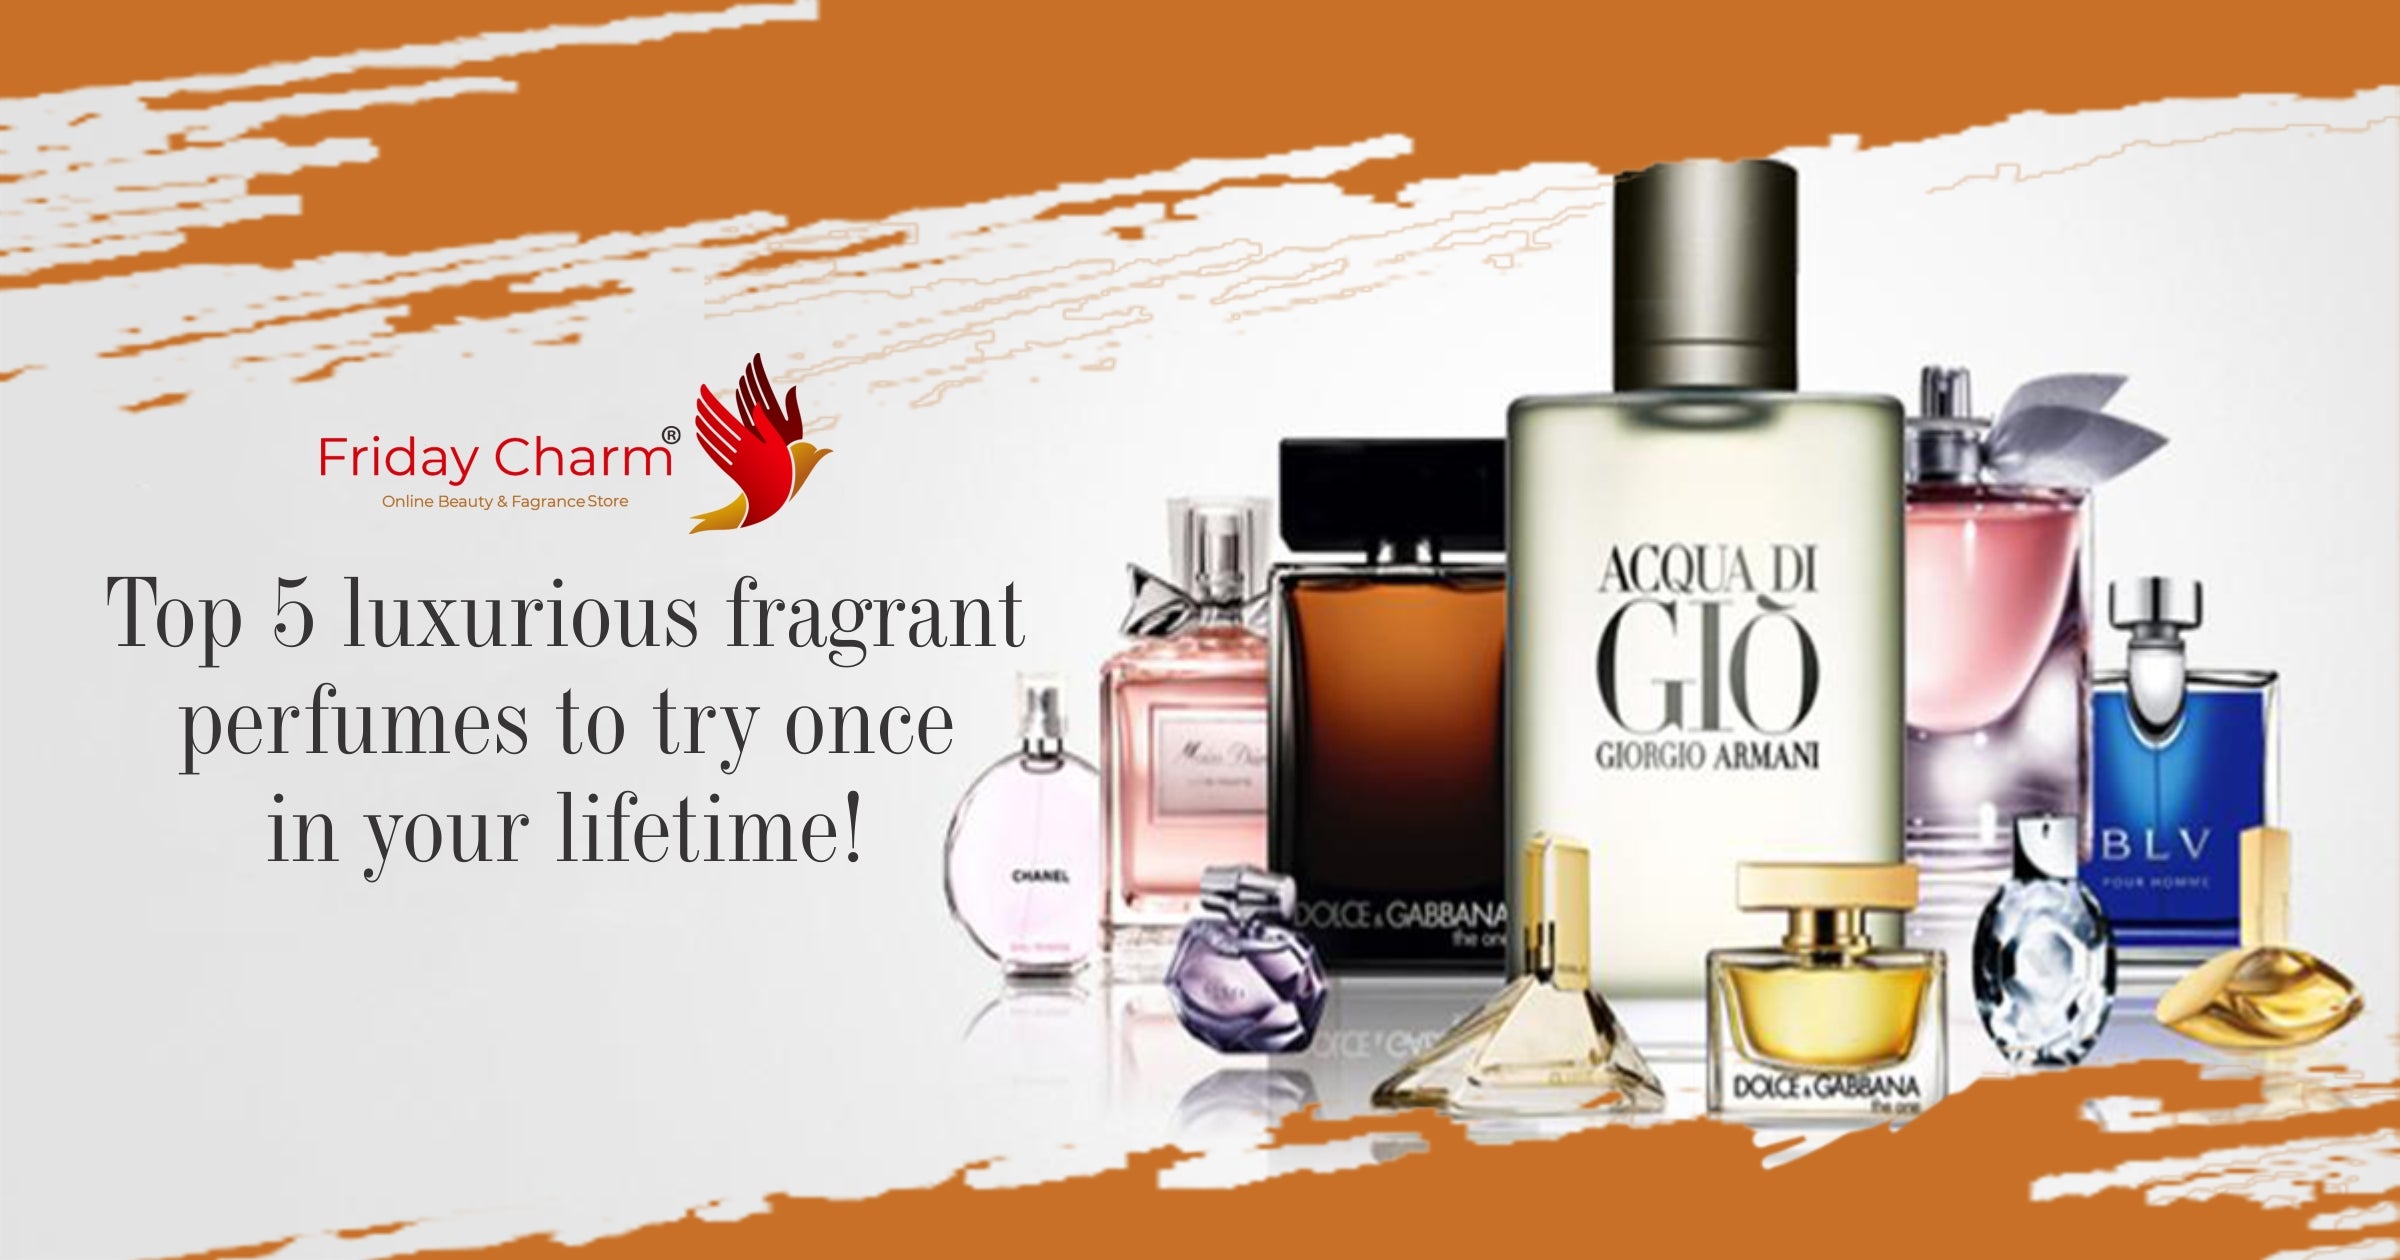 Top 5 Luxurious Fragrant Perfumes to try once in your lifetime!